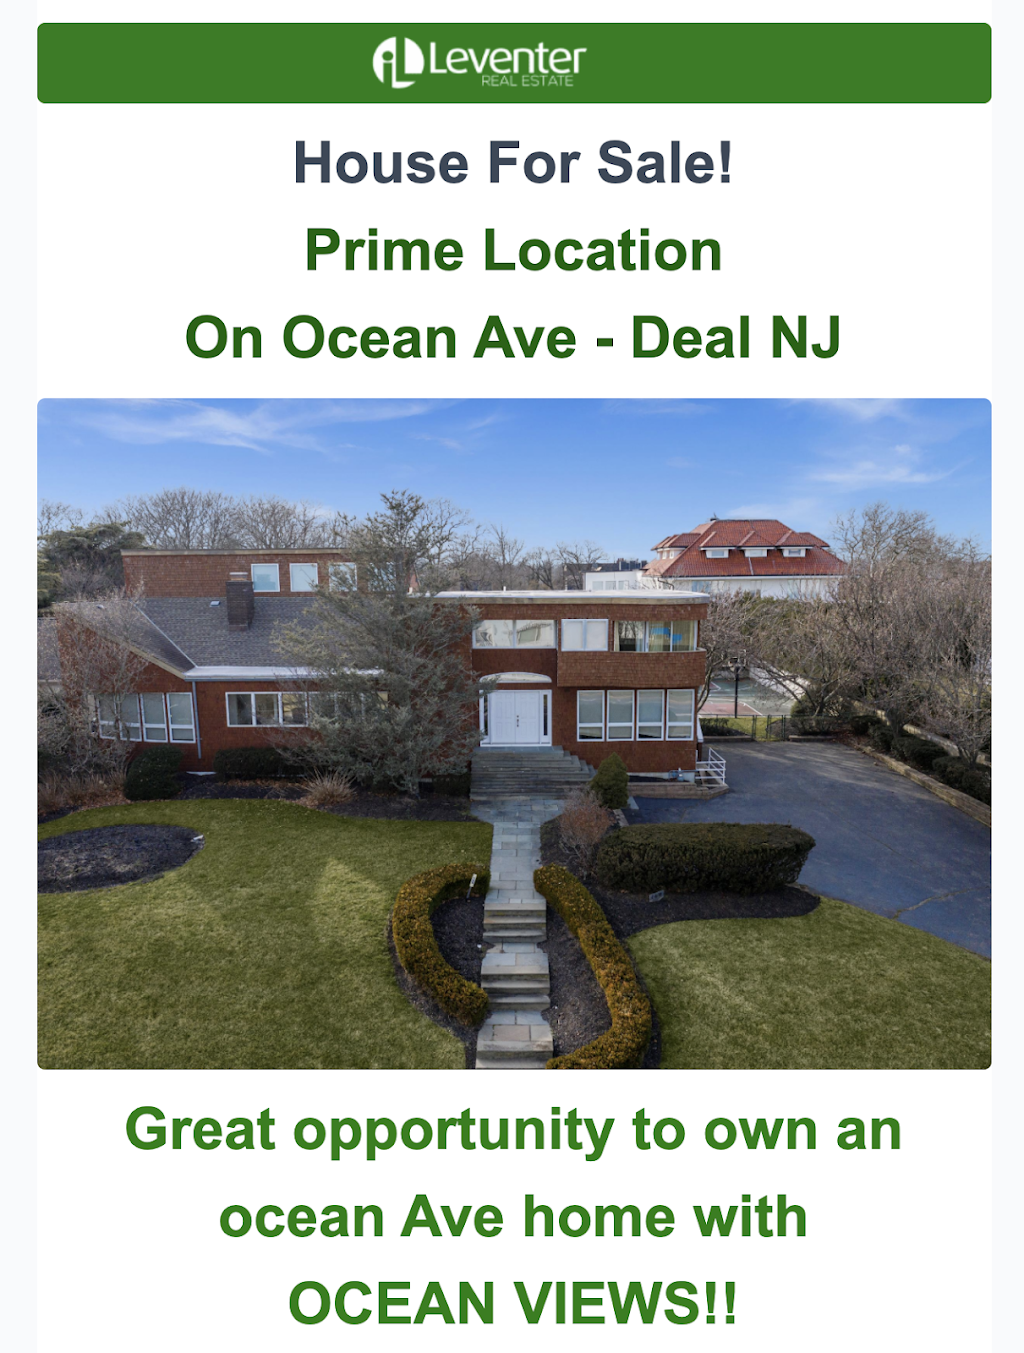 Irwin W Leventer Real Estate | 260 Norwood Ave, Deal, NJ 07723 | Phone: (732) 531-9800